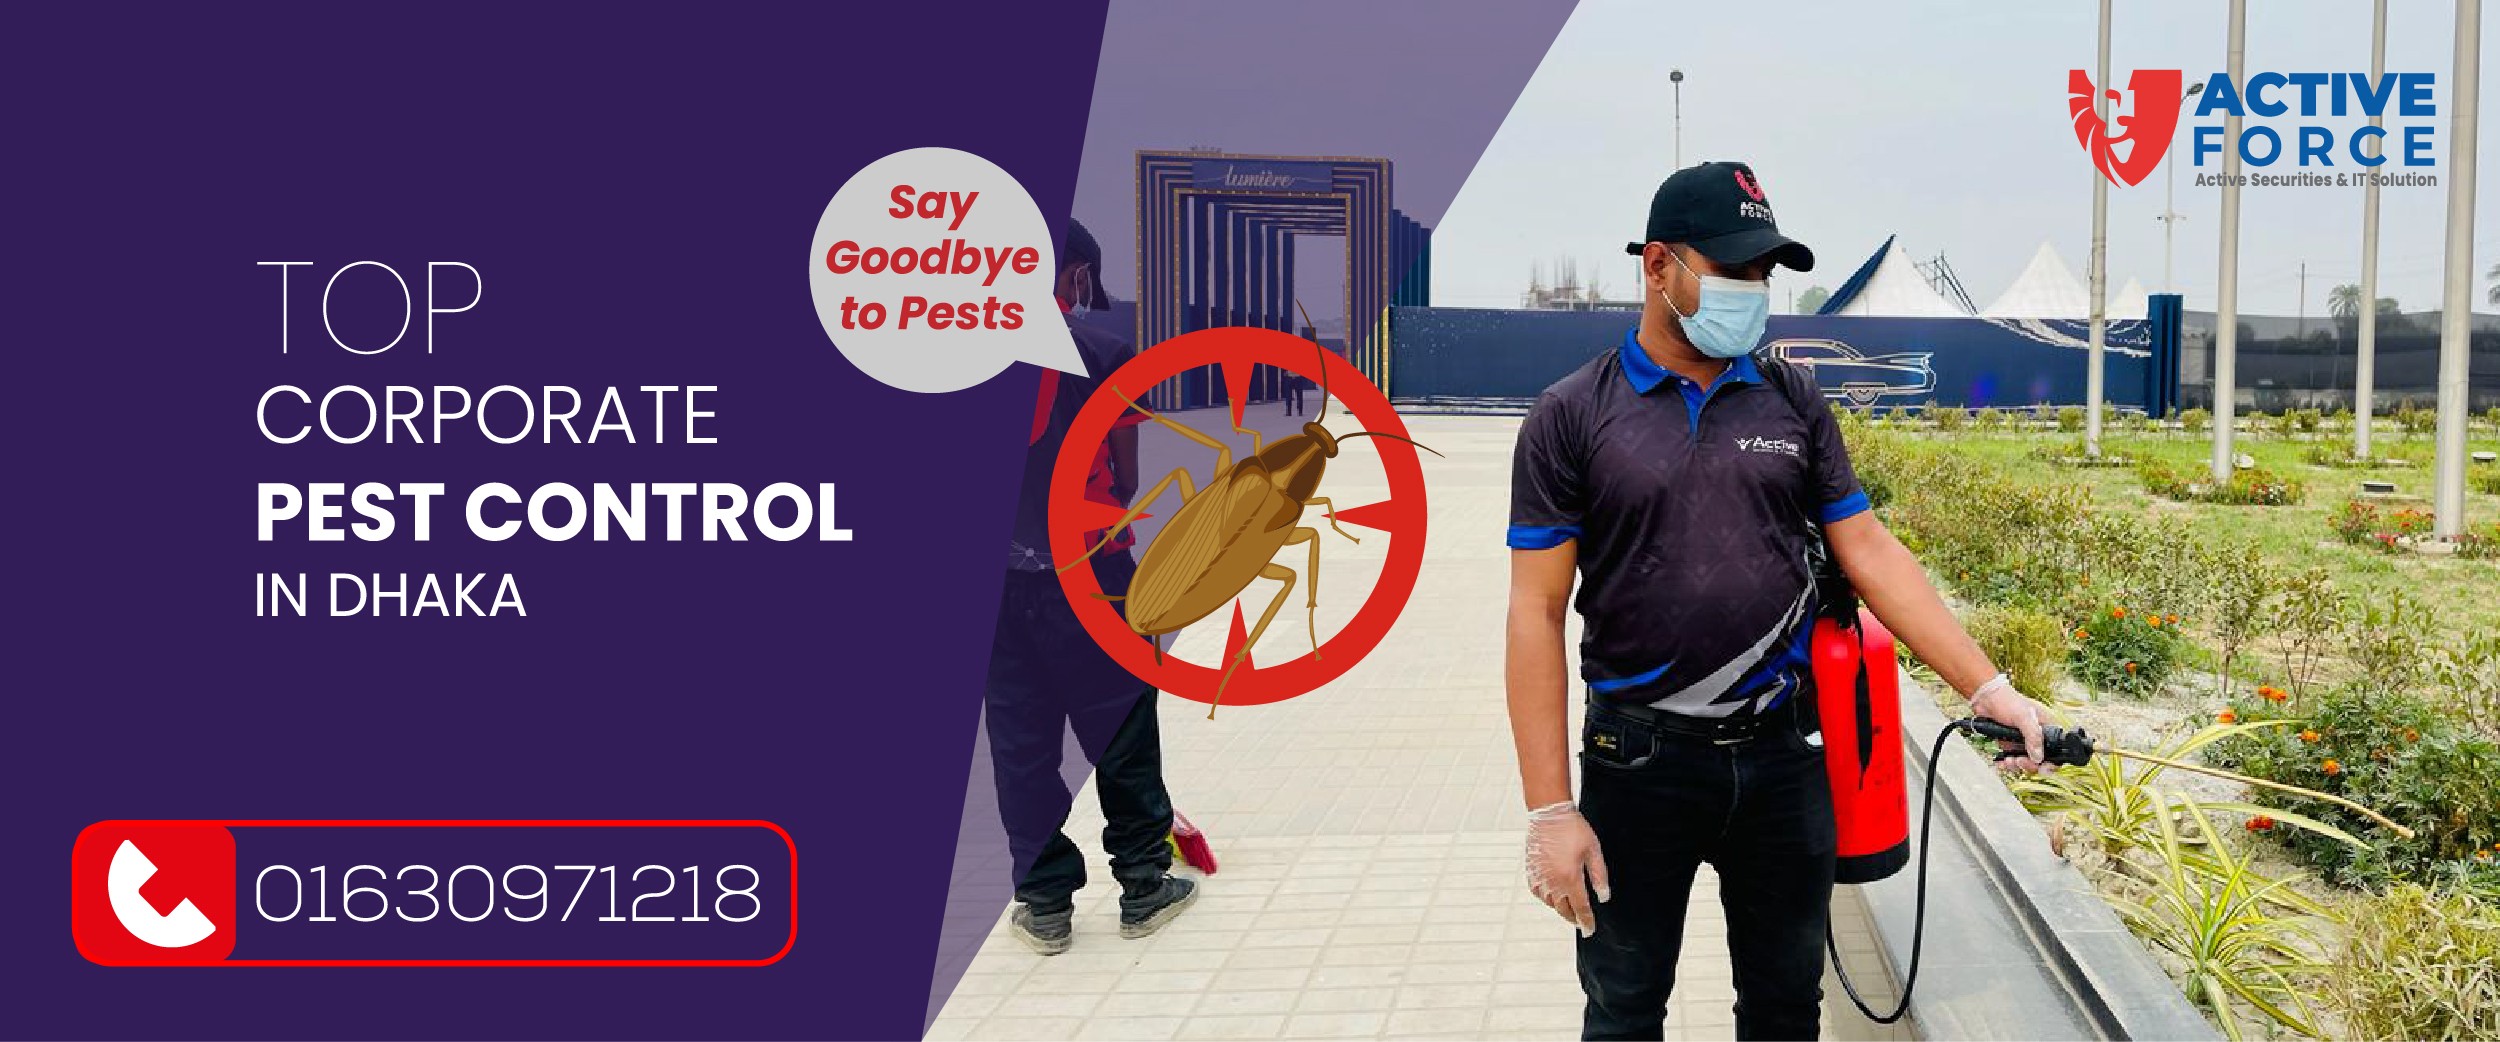 Say Goodbye to Pests with Top Corporate Pest Control in Dhaka | Active Force